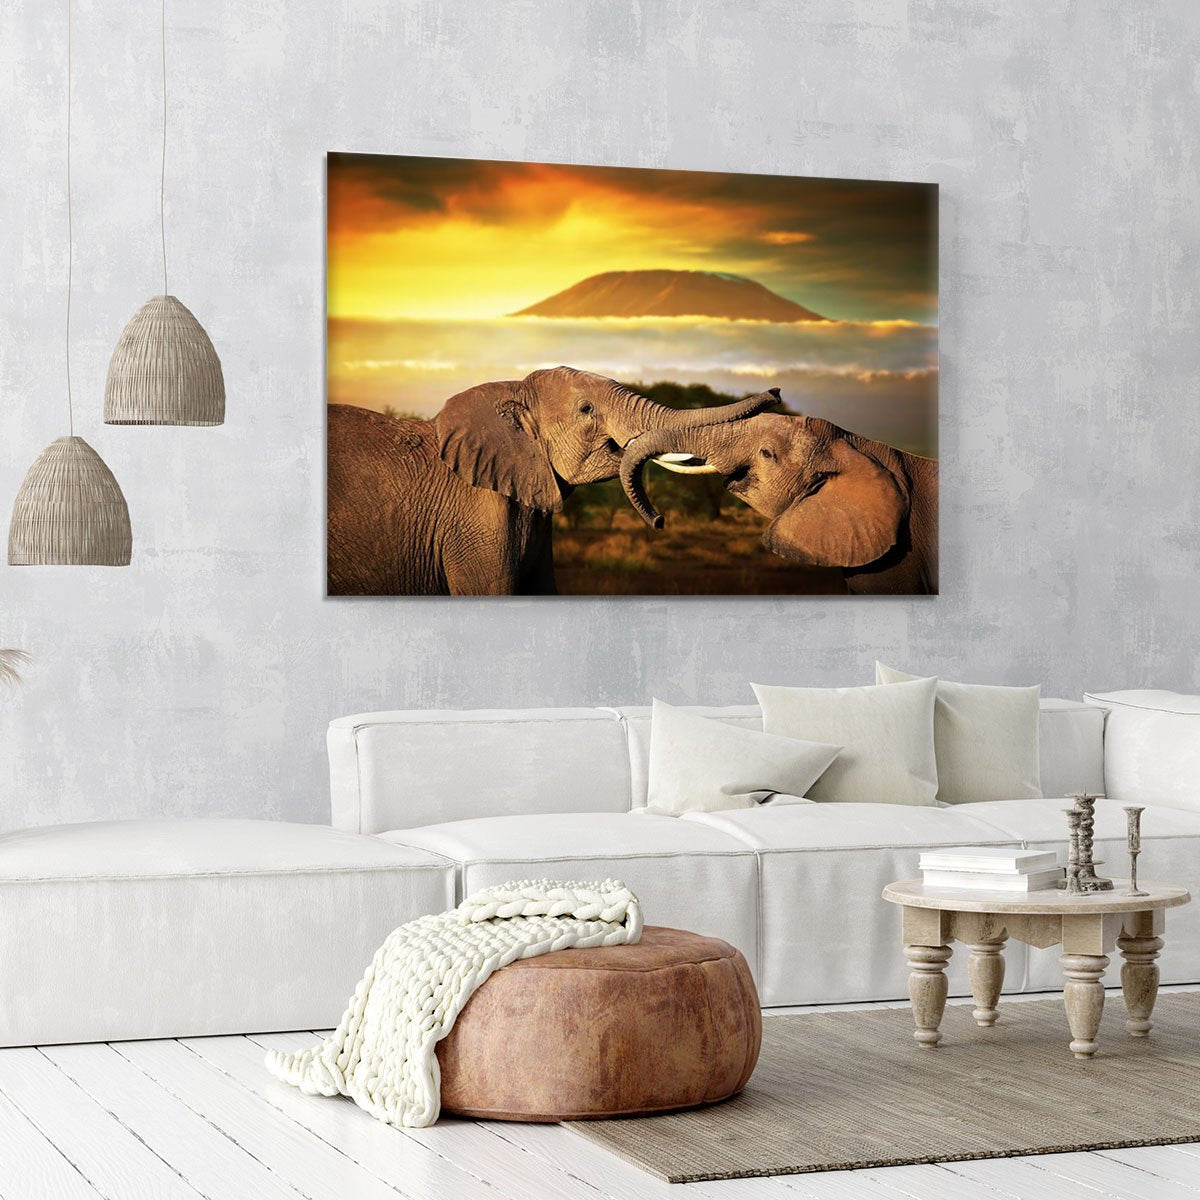 Elephants playing with their trunks Canvas Print or Poster